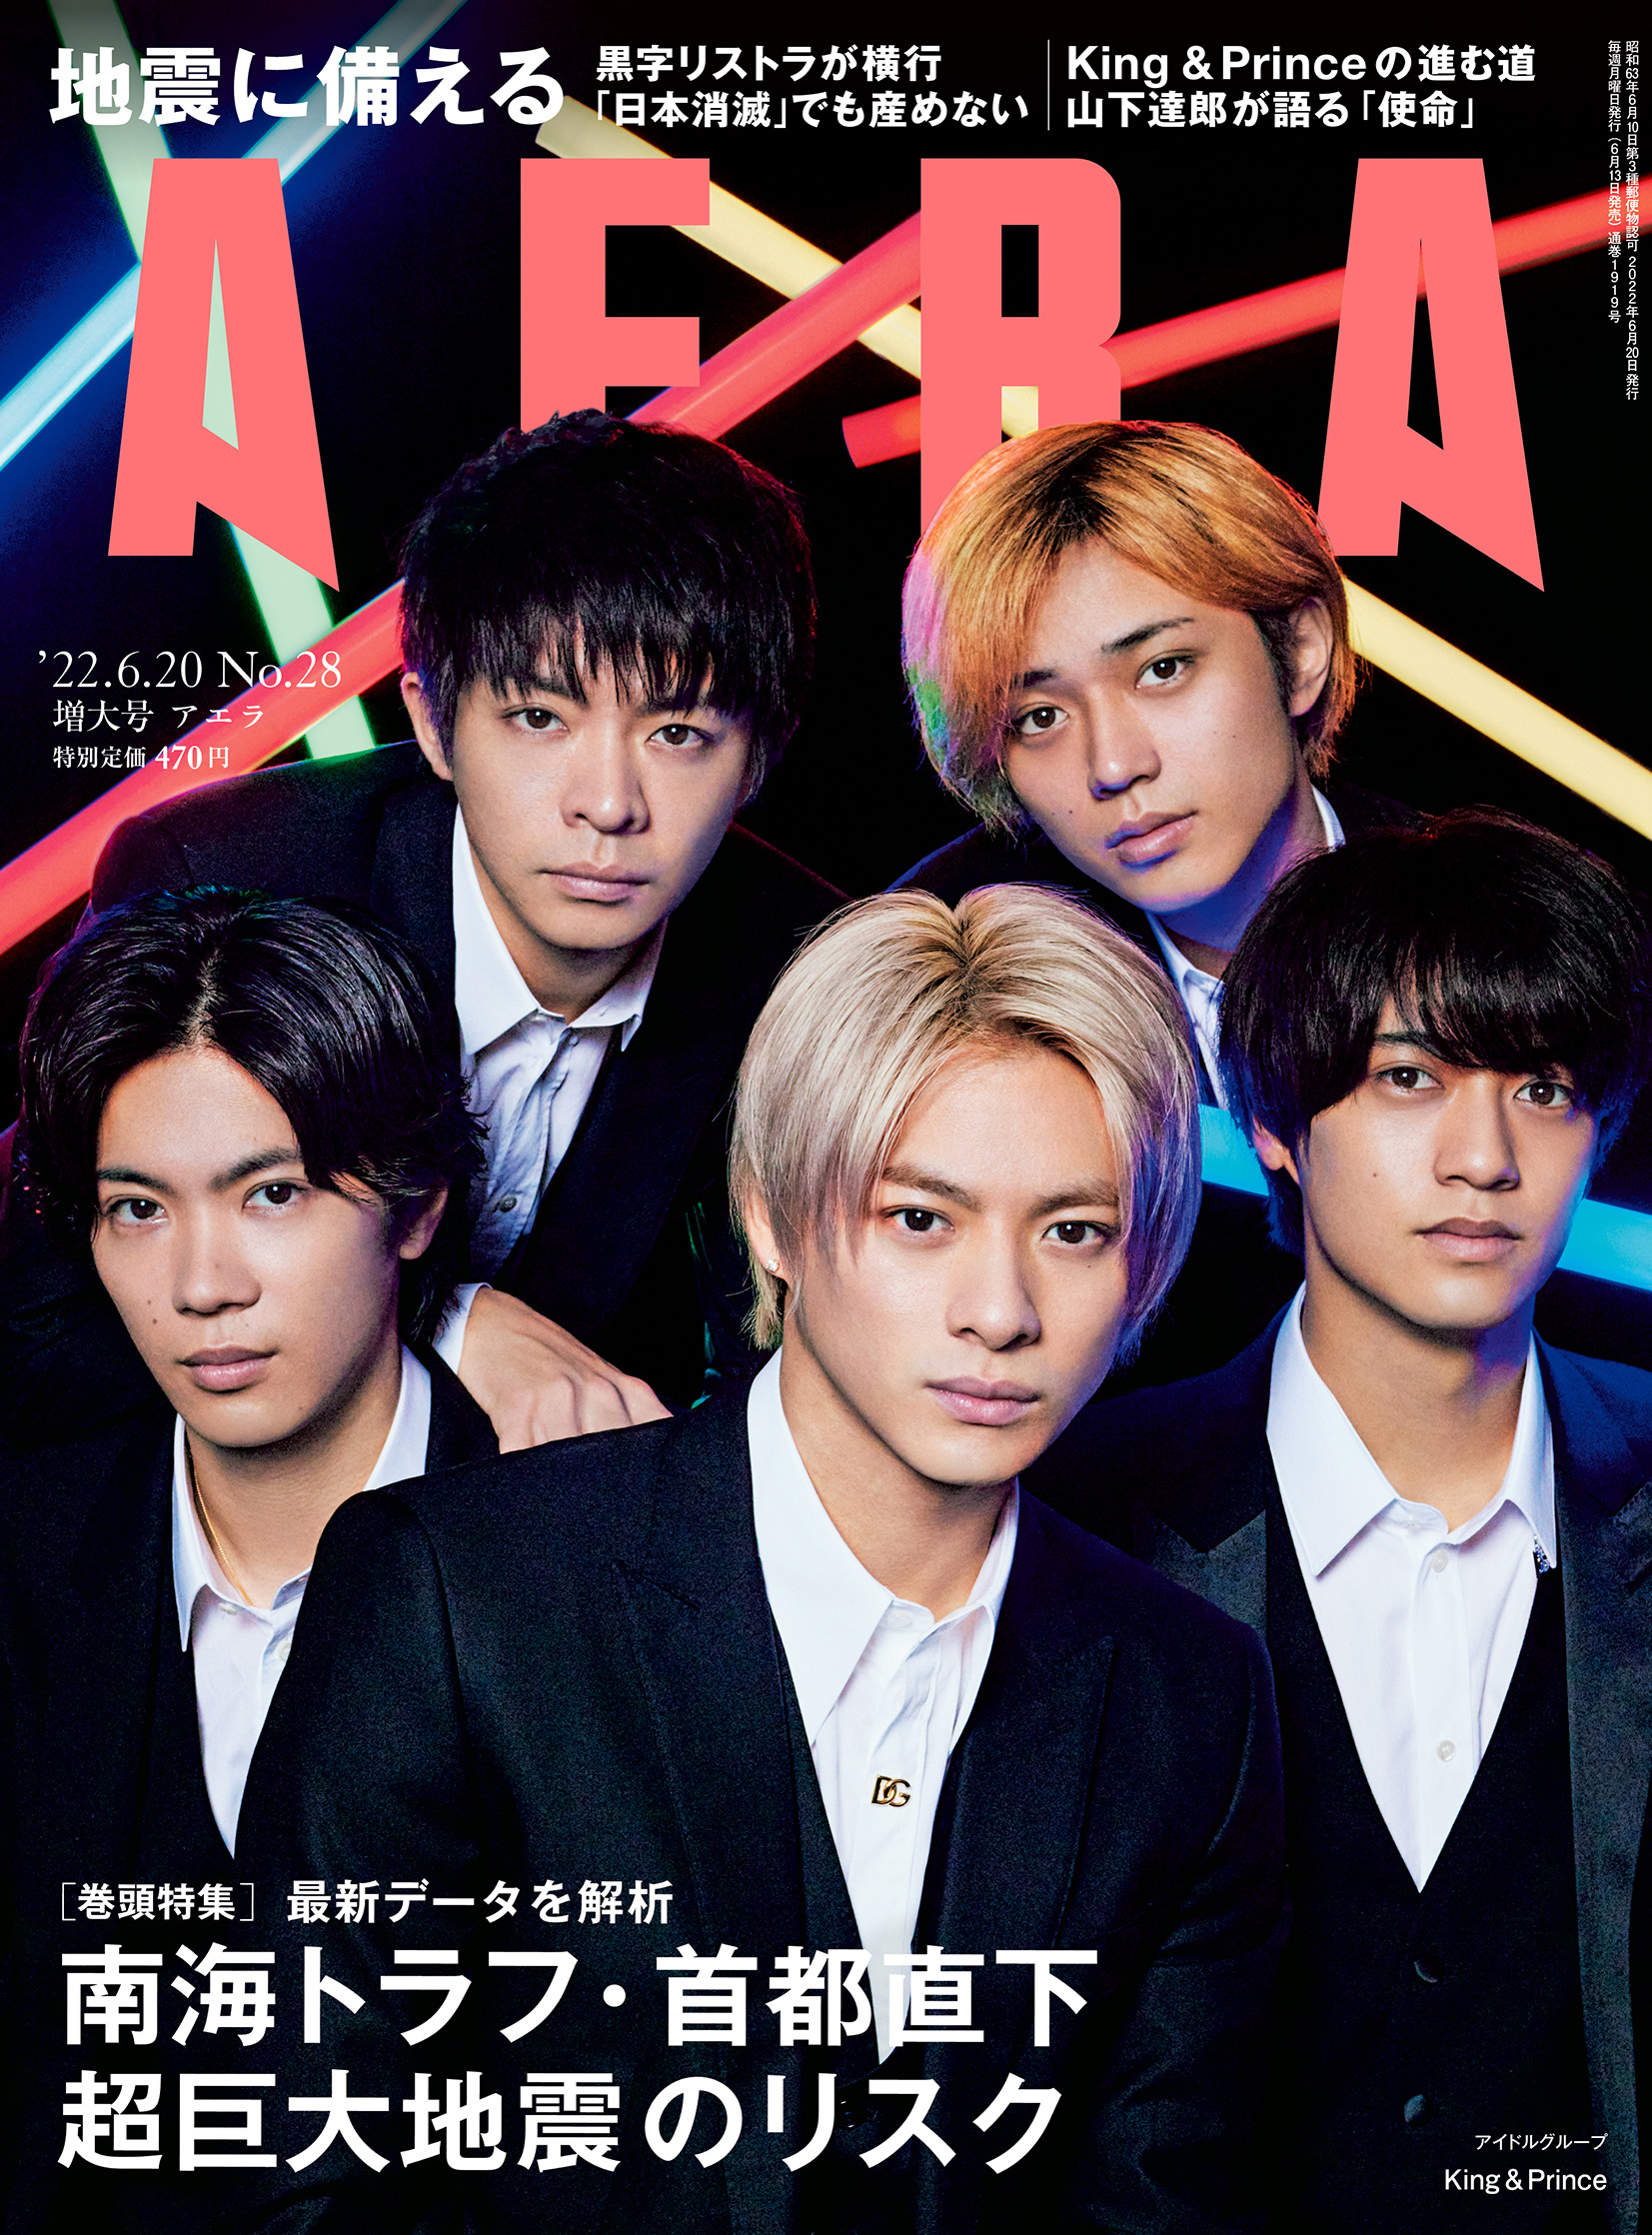 King & Prince Appear on AERA Magazine Cover, Speak in 7-page